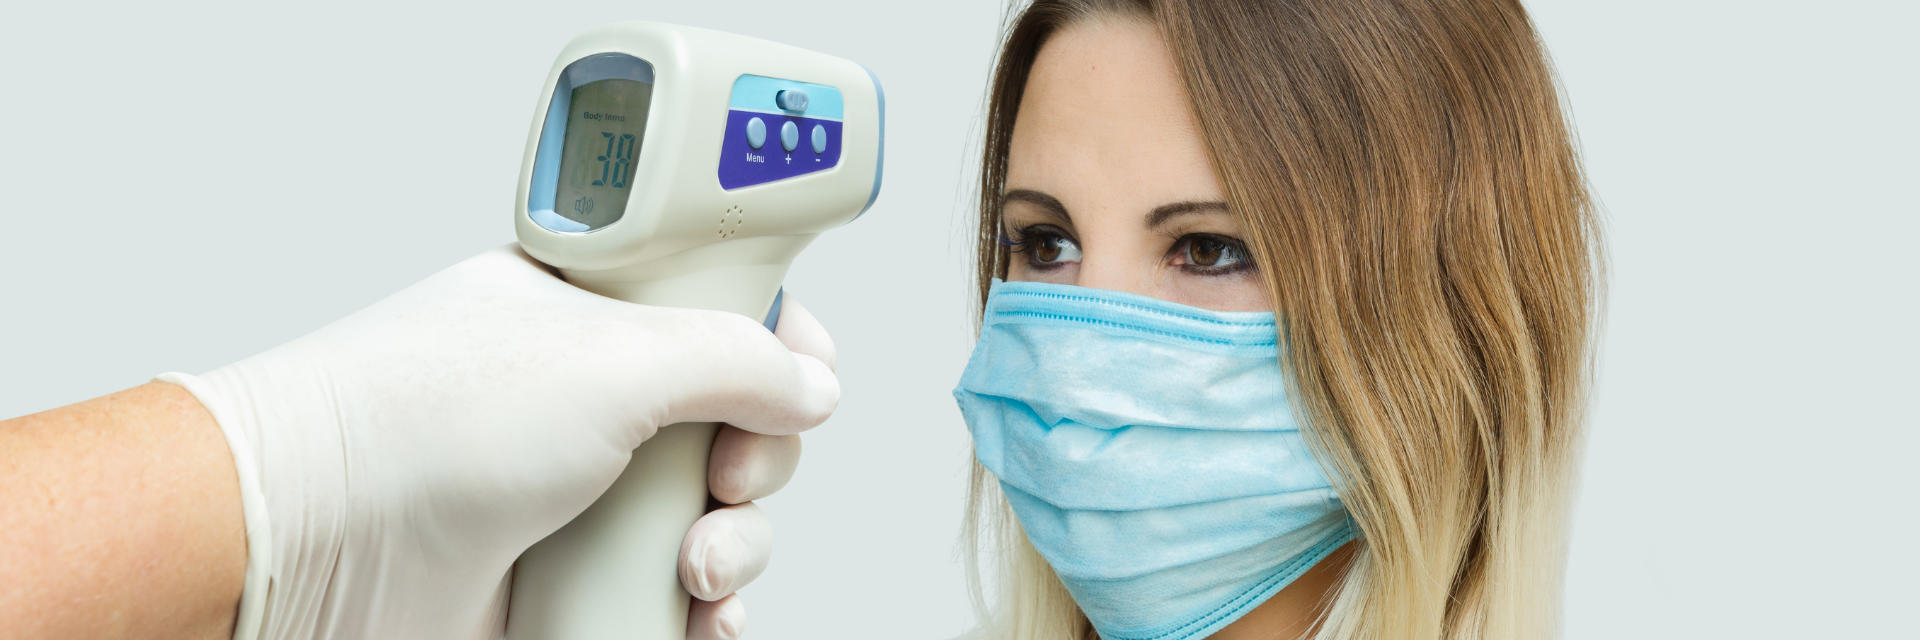 A woman wearing a medical mask having the temperature taken.